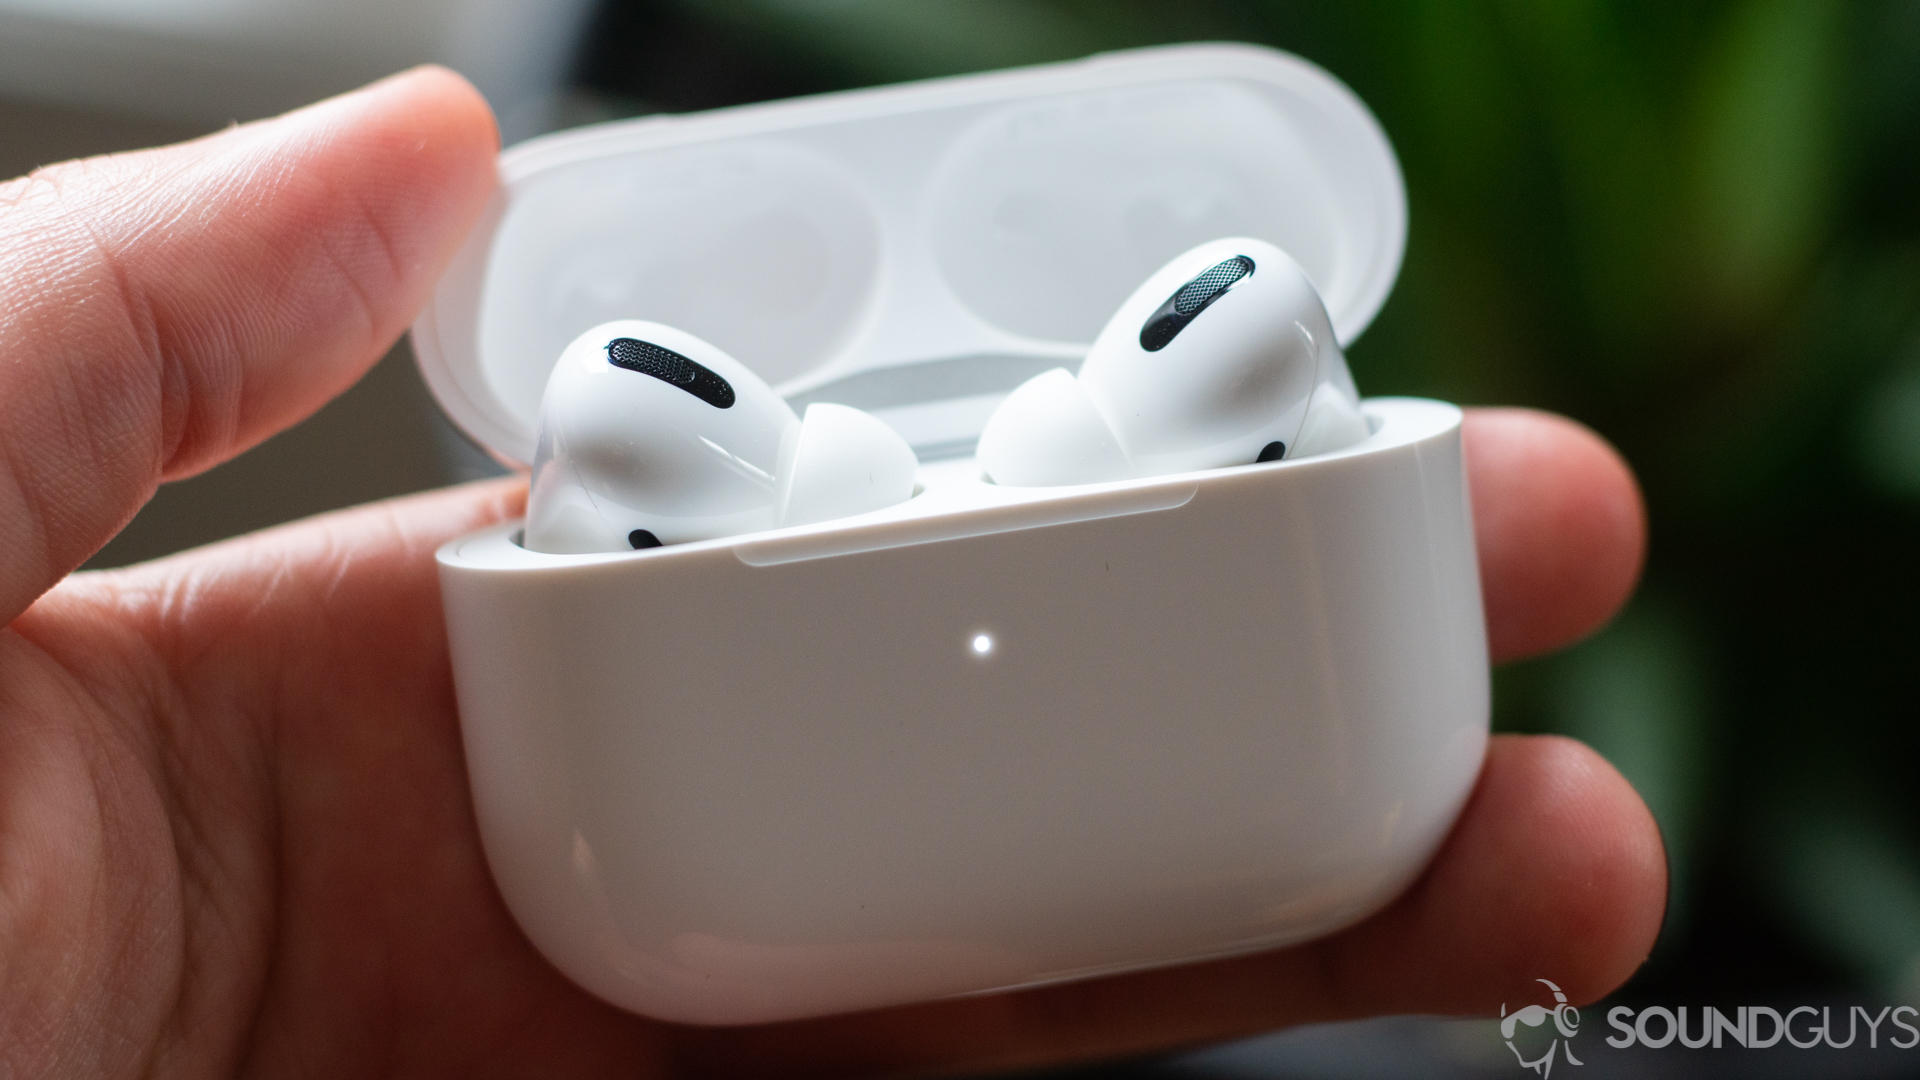 A picture of the Apple AirPods Pro earbuds charging case in a man's hand.